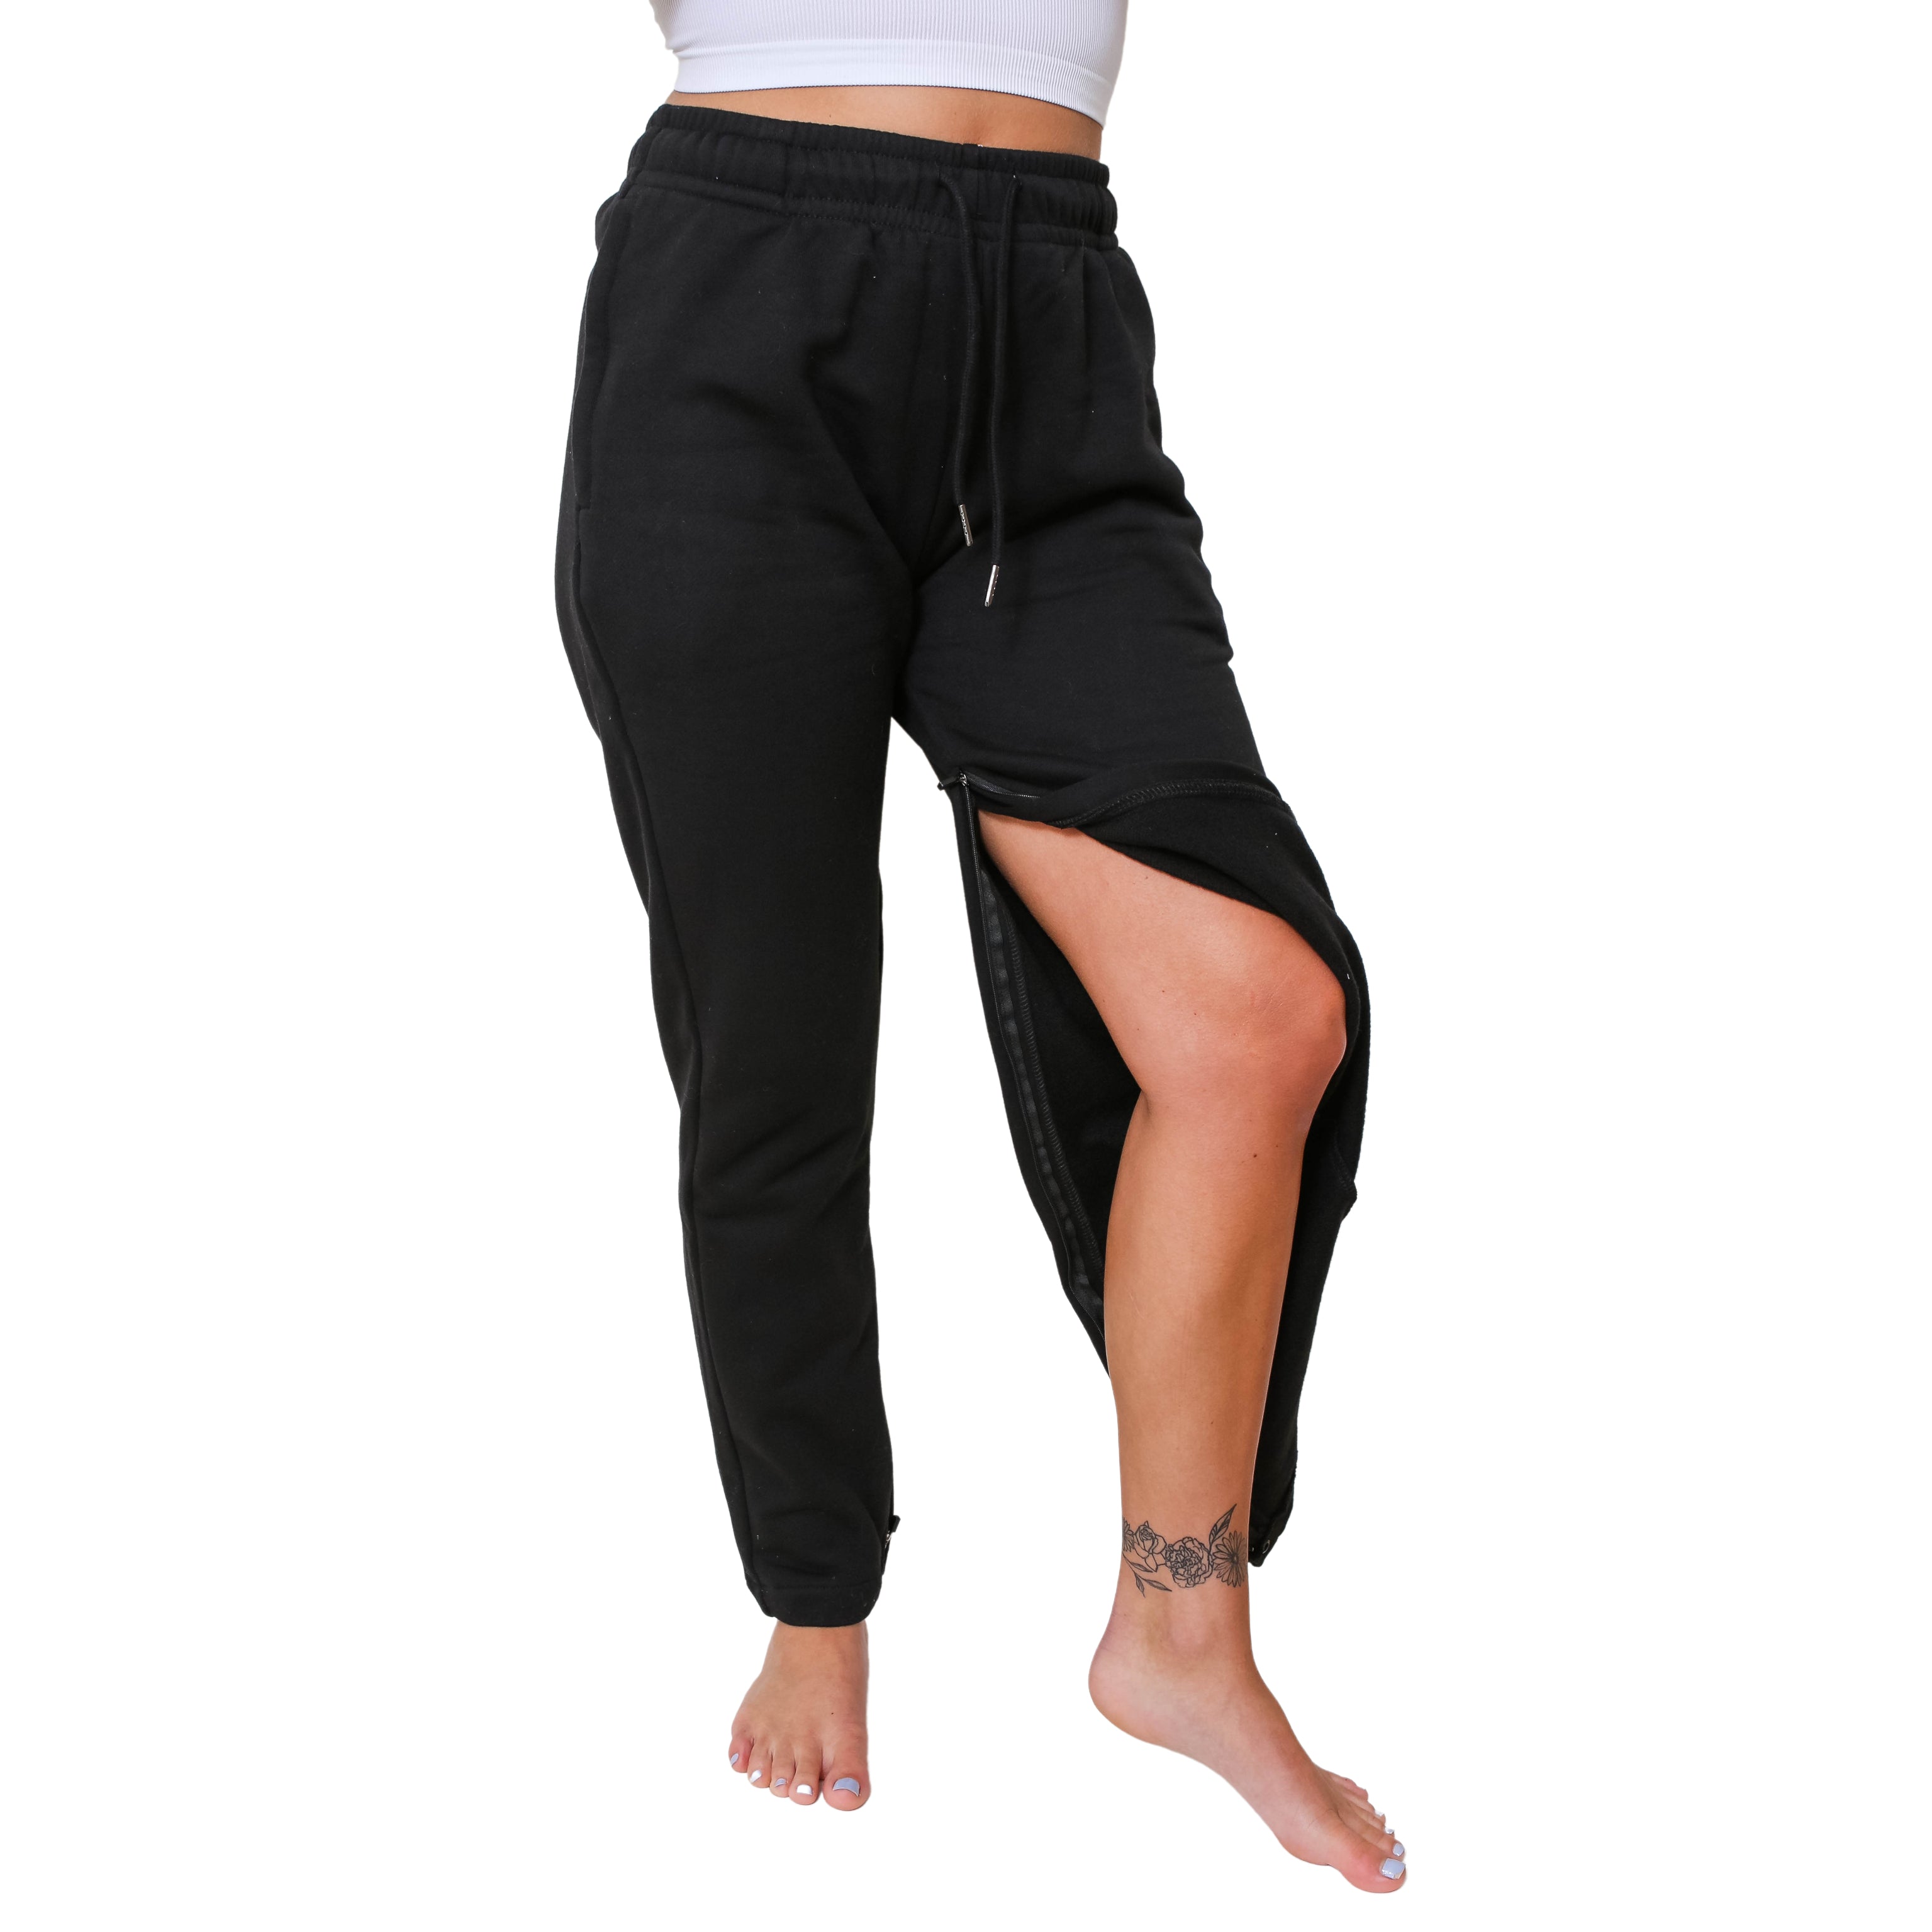 Zipper Opening Hemodialysis Sweatpants for Leg access AVF/Graft. For someone with Urinary catheter bag. Artificial Leg